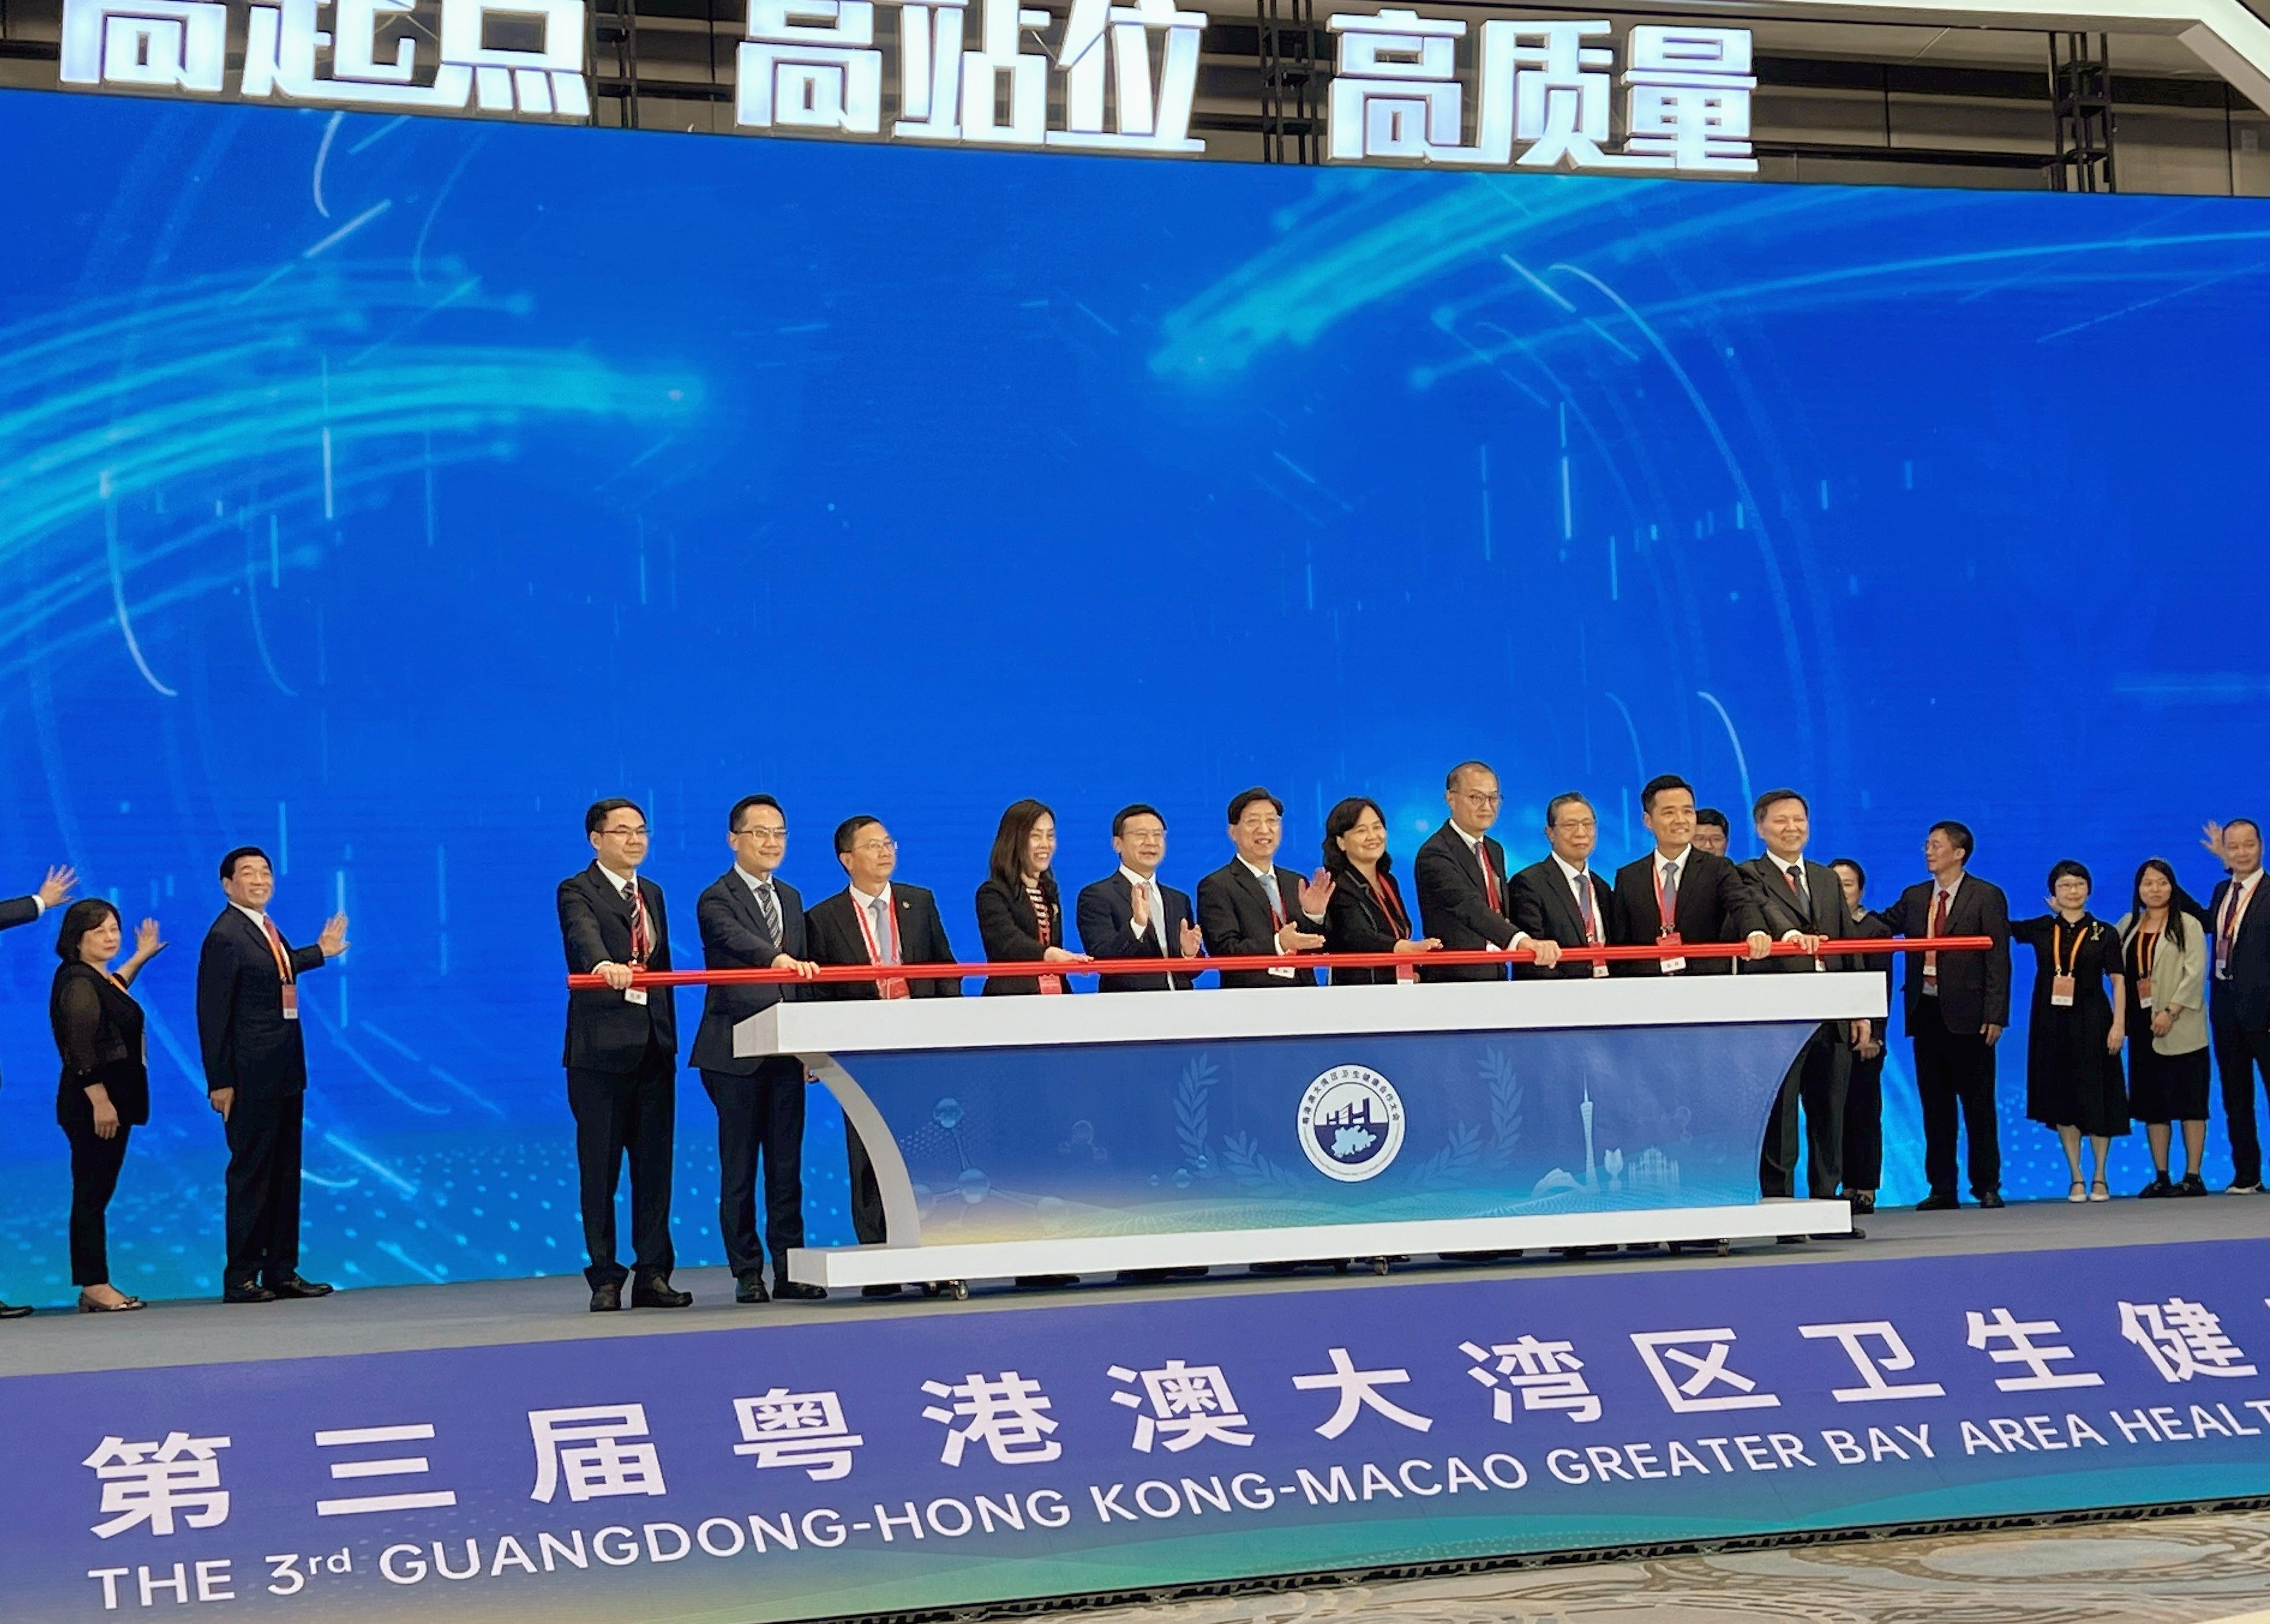 The Secretary for Health, Professor Lo Chung-mau, led a Hong Kong Special Administrative Region delegation to attend the 3rd Guangdong-Hong Kong-Macao Greater Bay Area Health Cooperation Conference in Nansha, Guangzhou, today (November 10). Photo shows Professor Lo (front row, fourth right), Vice Minister of the National Health Commission Mr Zeng Yixin (front row, centre); the Commissioner of the National Administration of Traditional Chinese Medicine, Professor Yu Yanhong (front row, fifth right); the Director of Health, Dr Ronald Lam (front row, second left); and other guests officiating at the Conference.